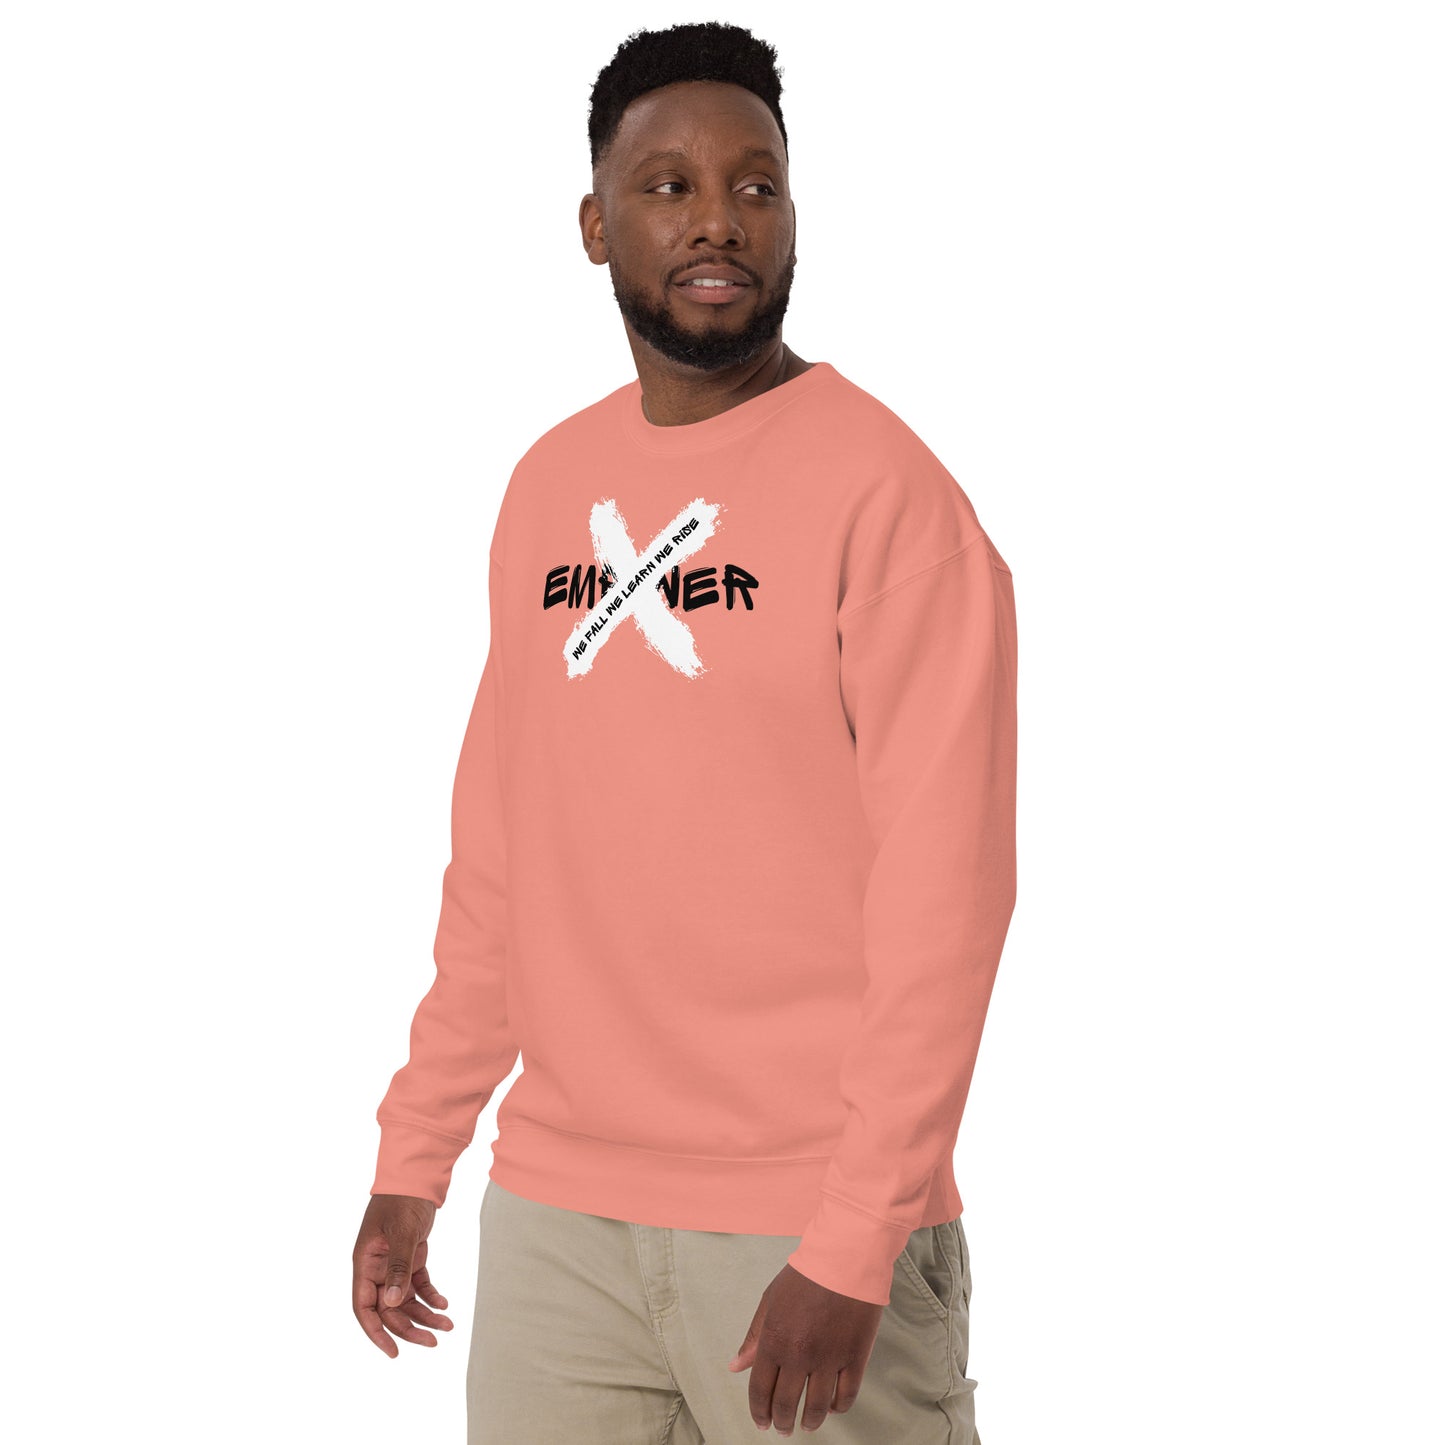 Dusty Rose Men's Empower X "We Fall We Learn We Rise" Quote Sweatshirt Jumper